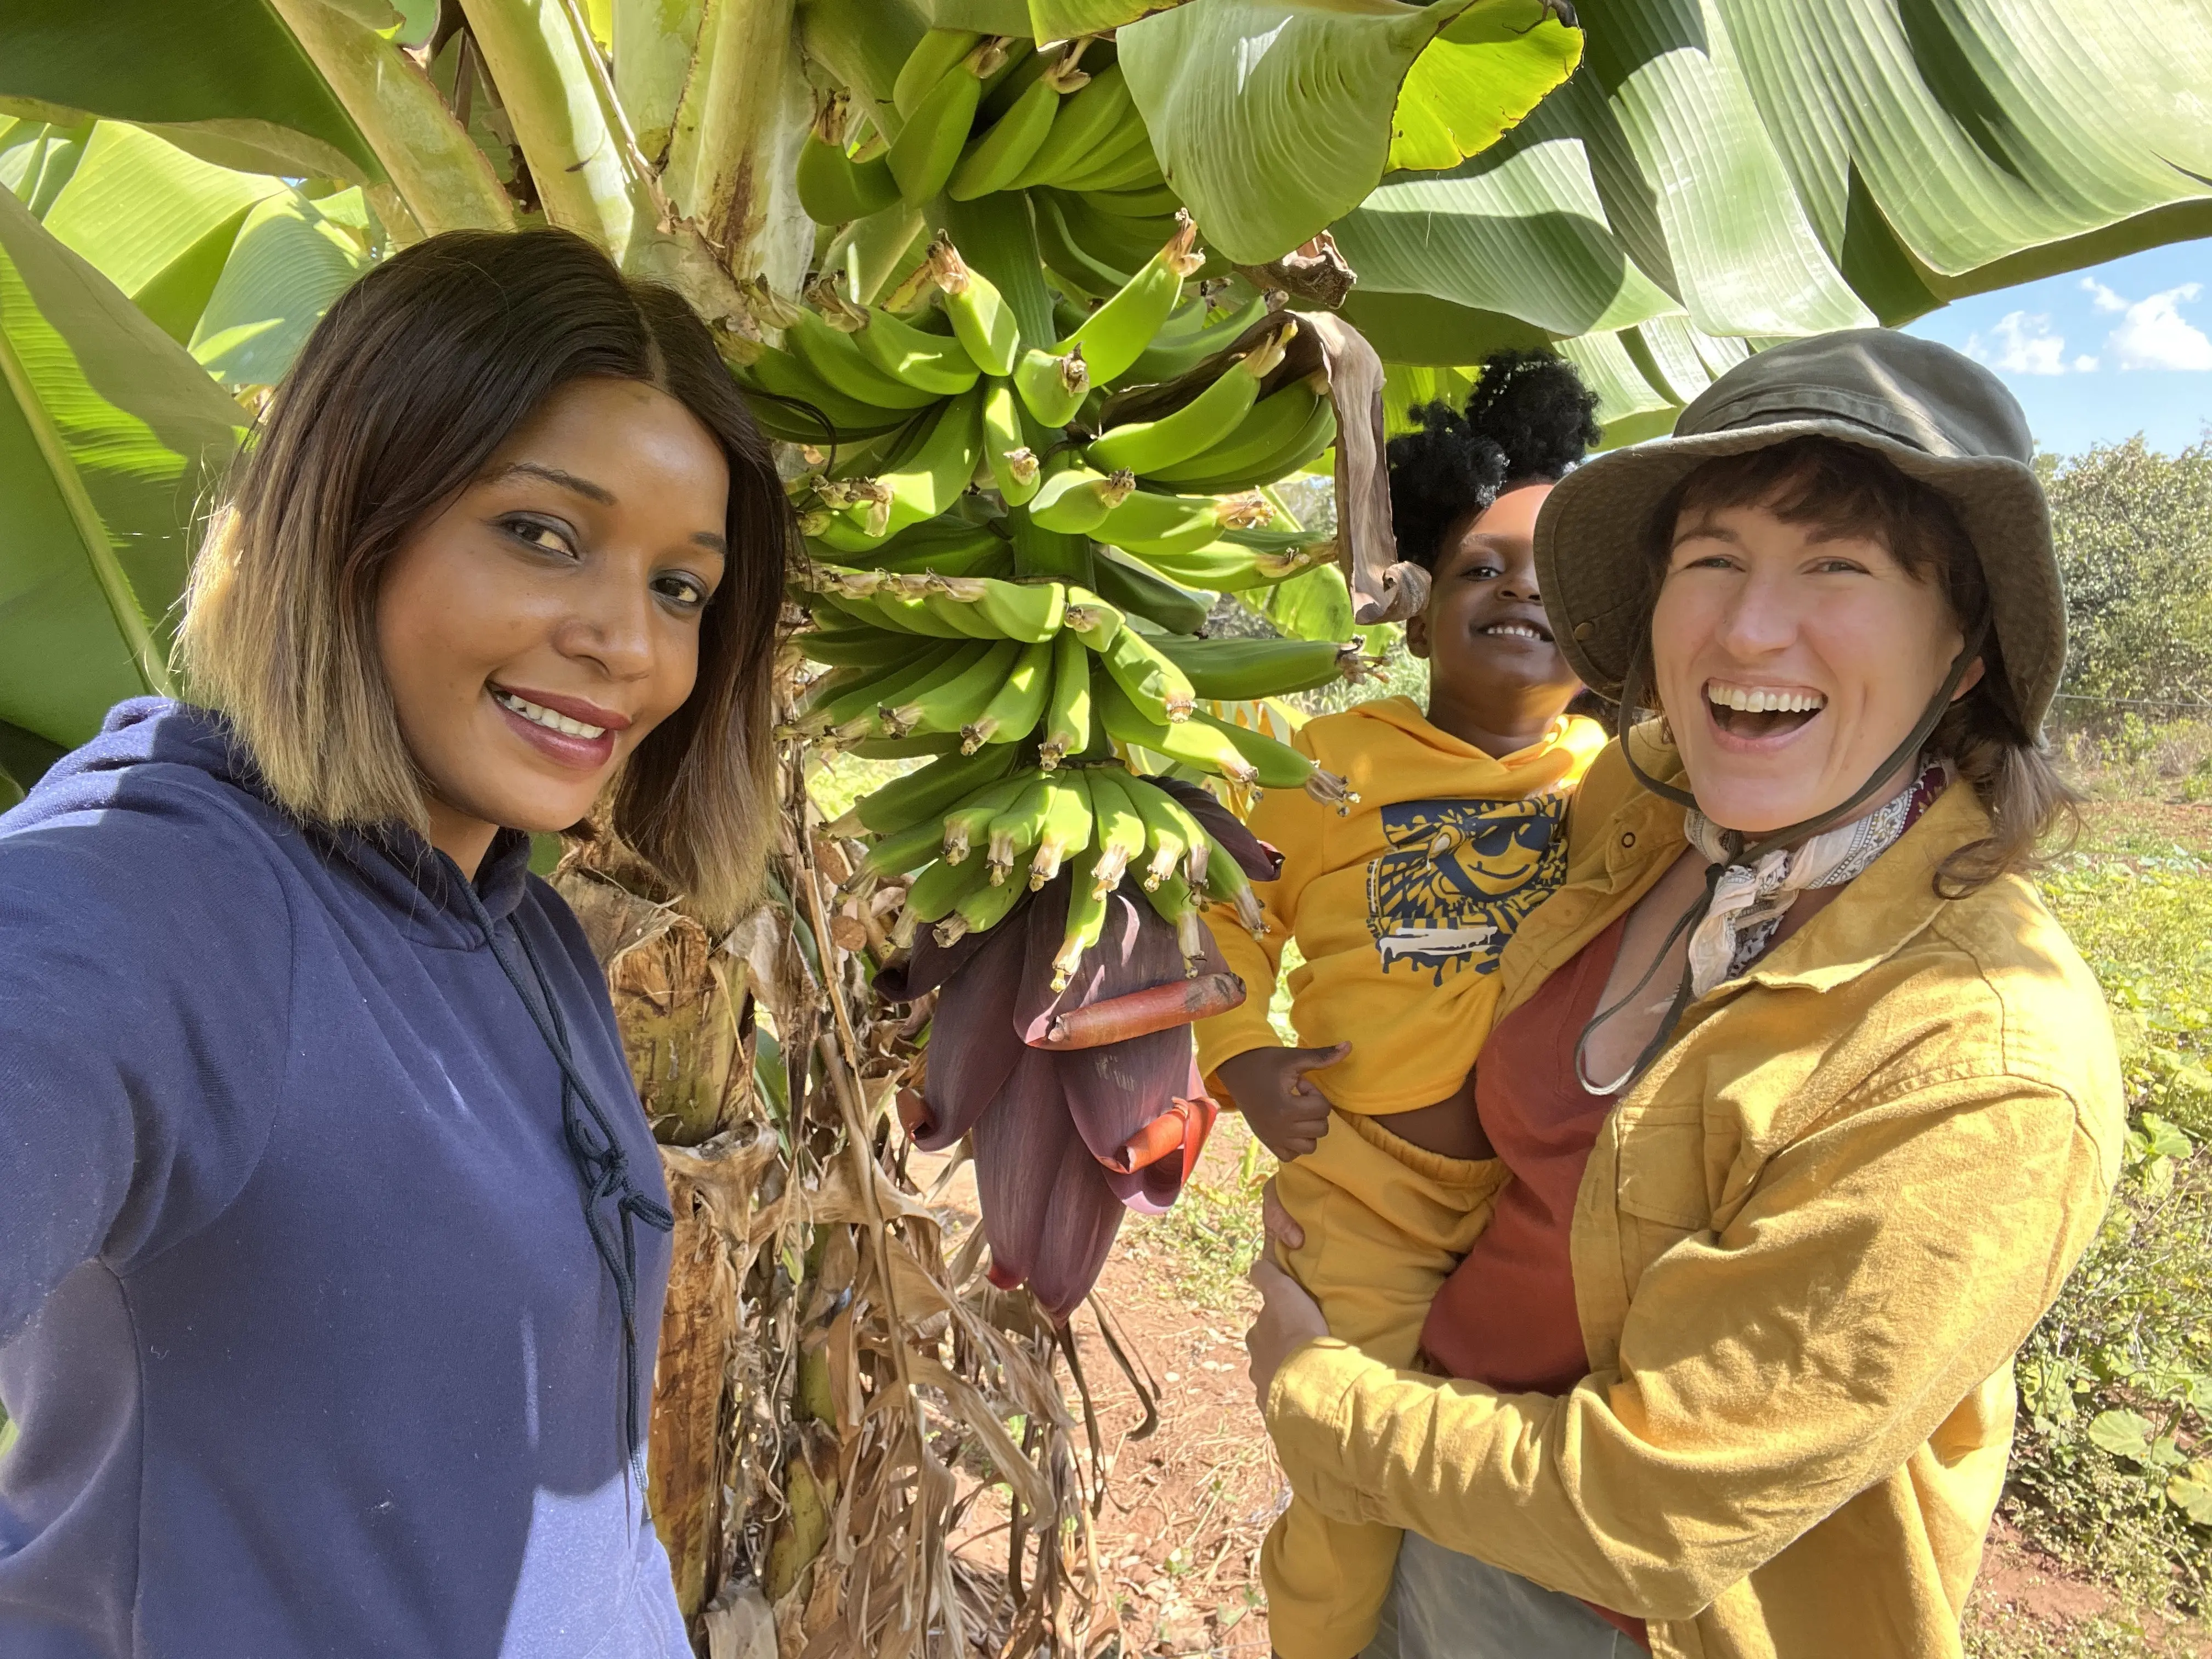 Woman holds a young child while she stands with her friend in front of banana tree